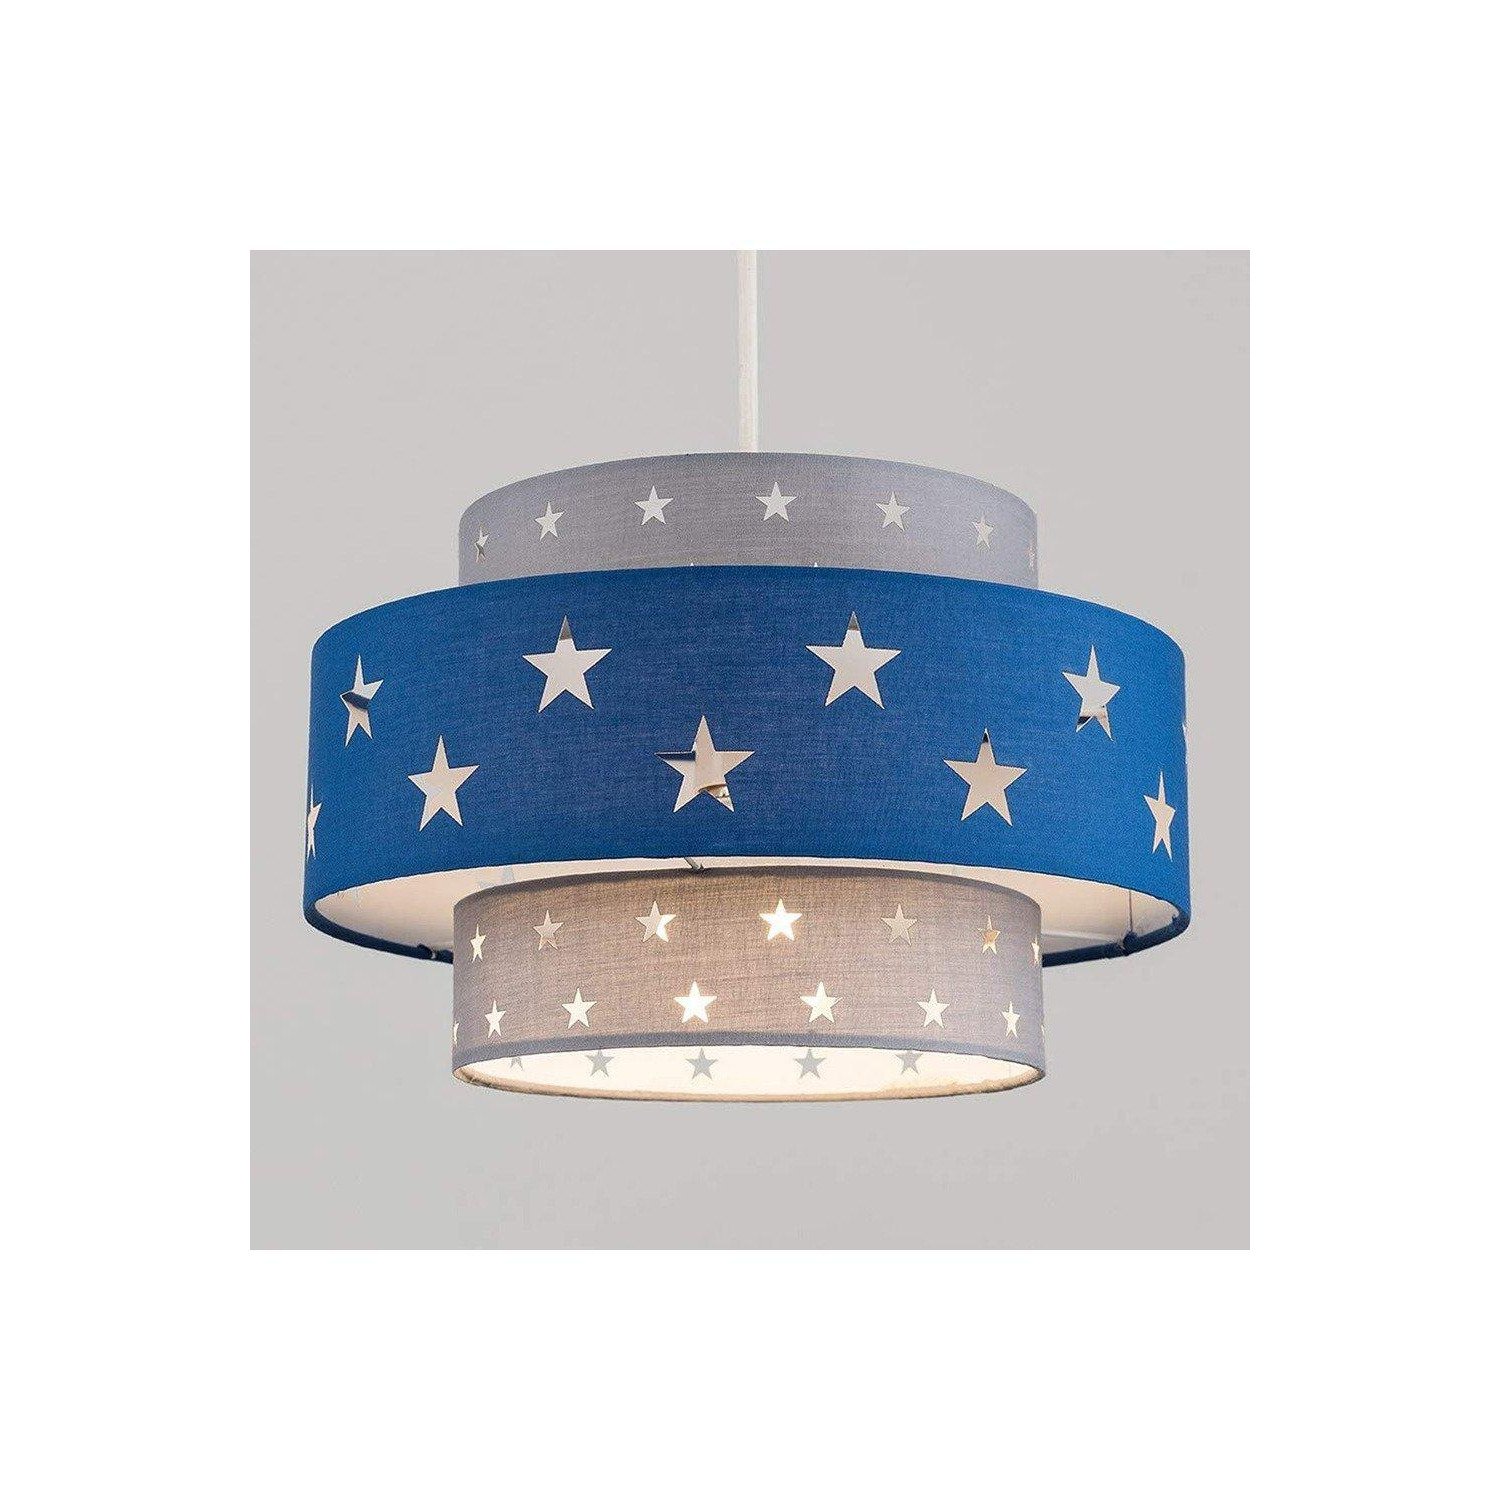 'Starlight' Grey & Navy Blue Star Two Tier Easy Fit Ceiling Lamp Shade - image 1